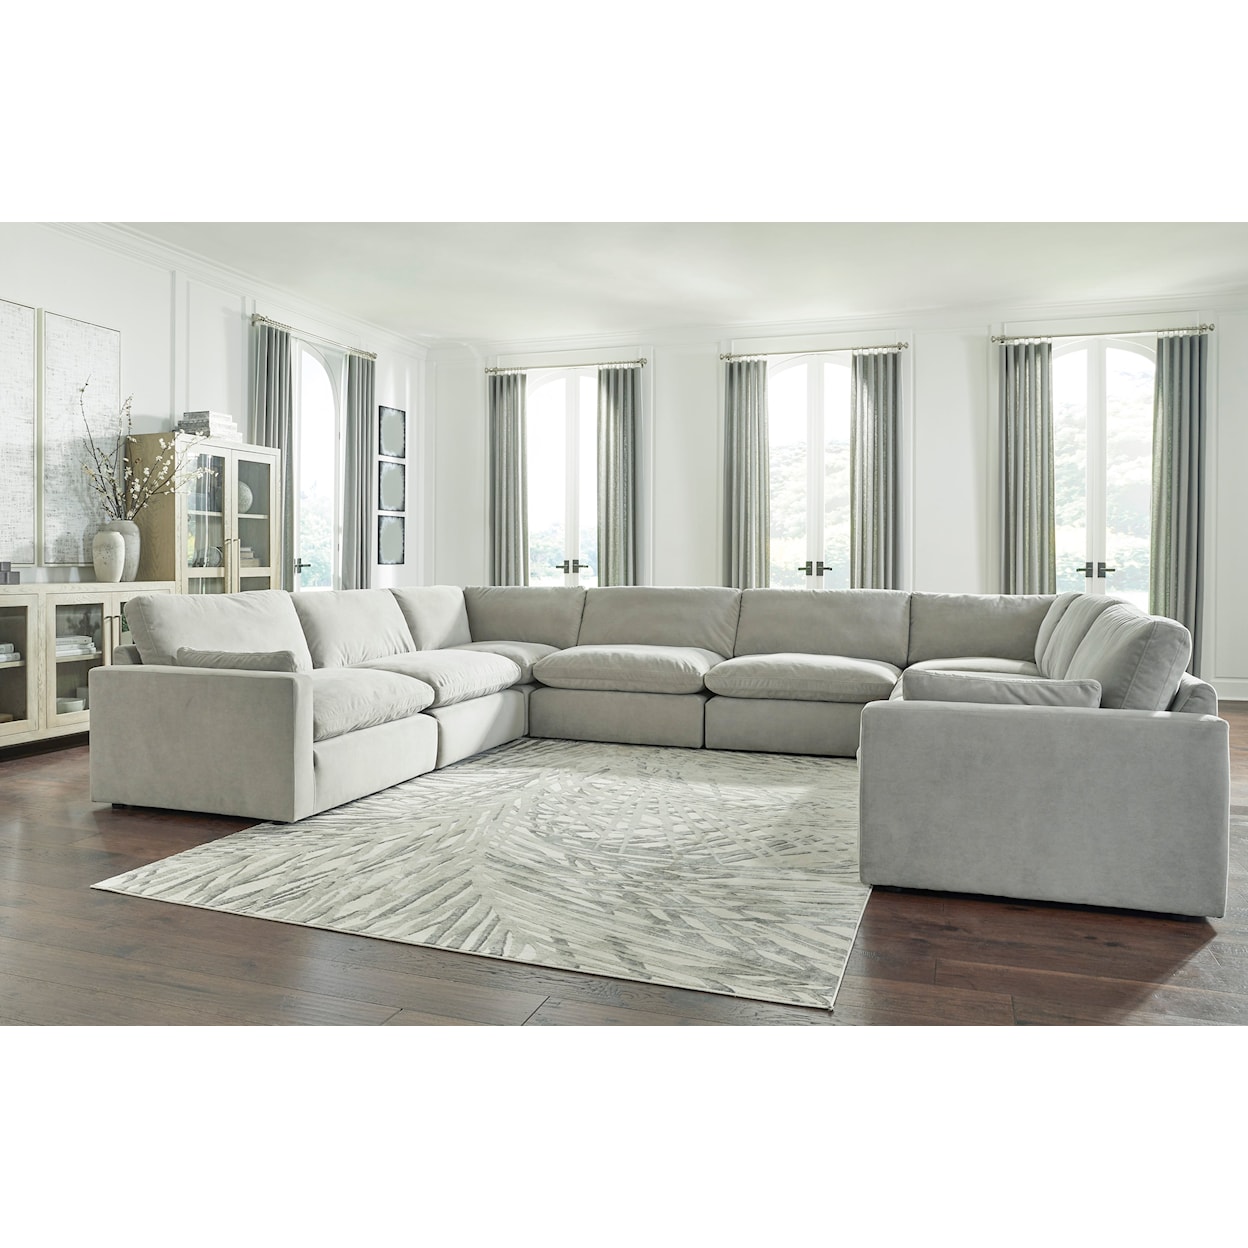 Benchcraft Sophie 8-Piece Sectional